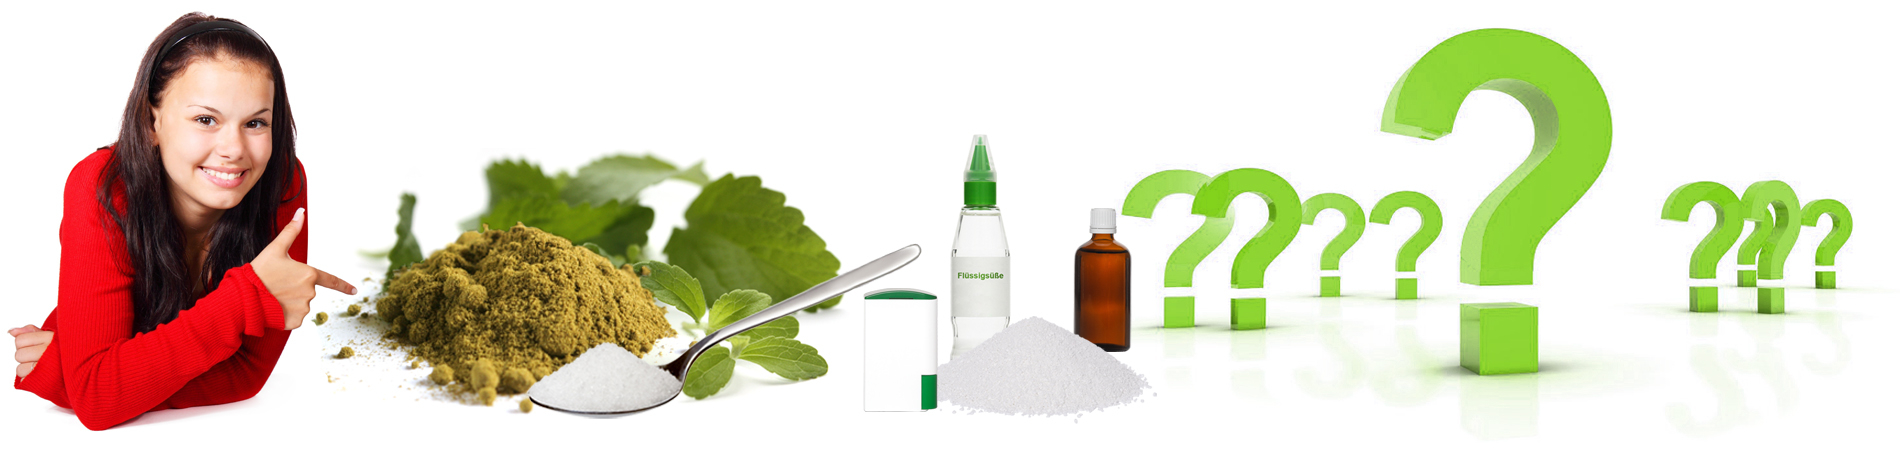 Frequently asked questions about Stevia FAQs - the most...